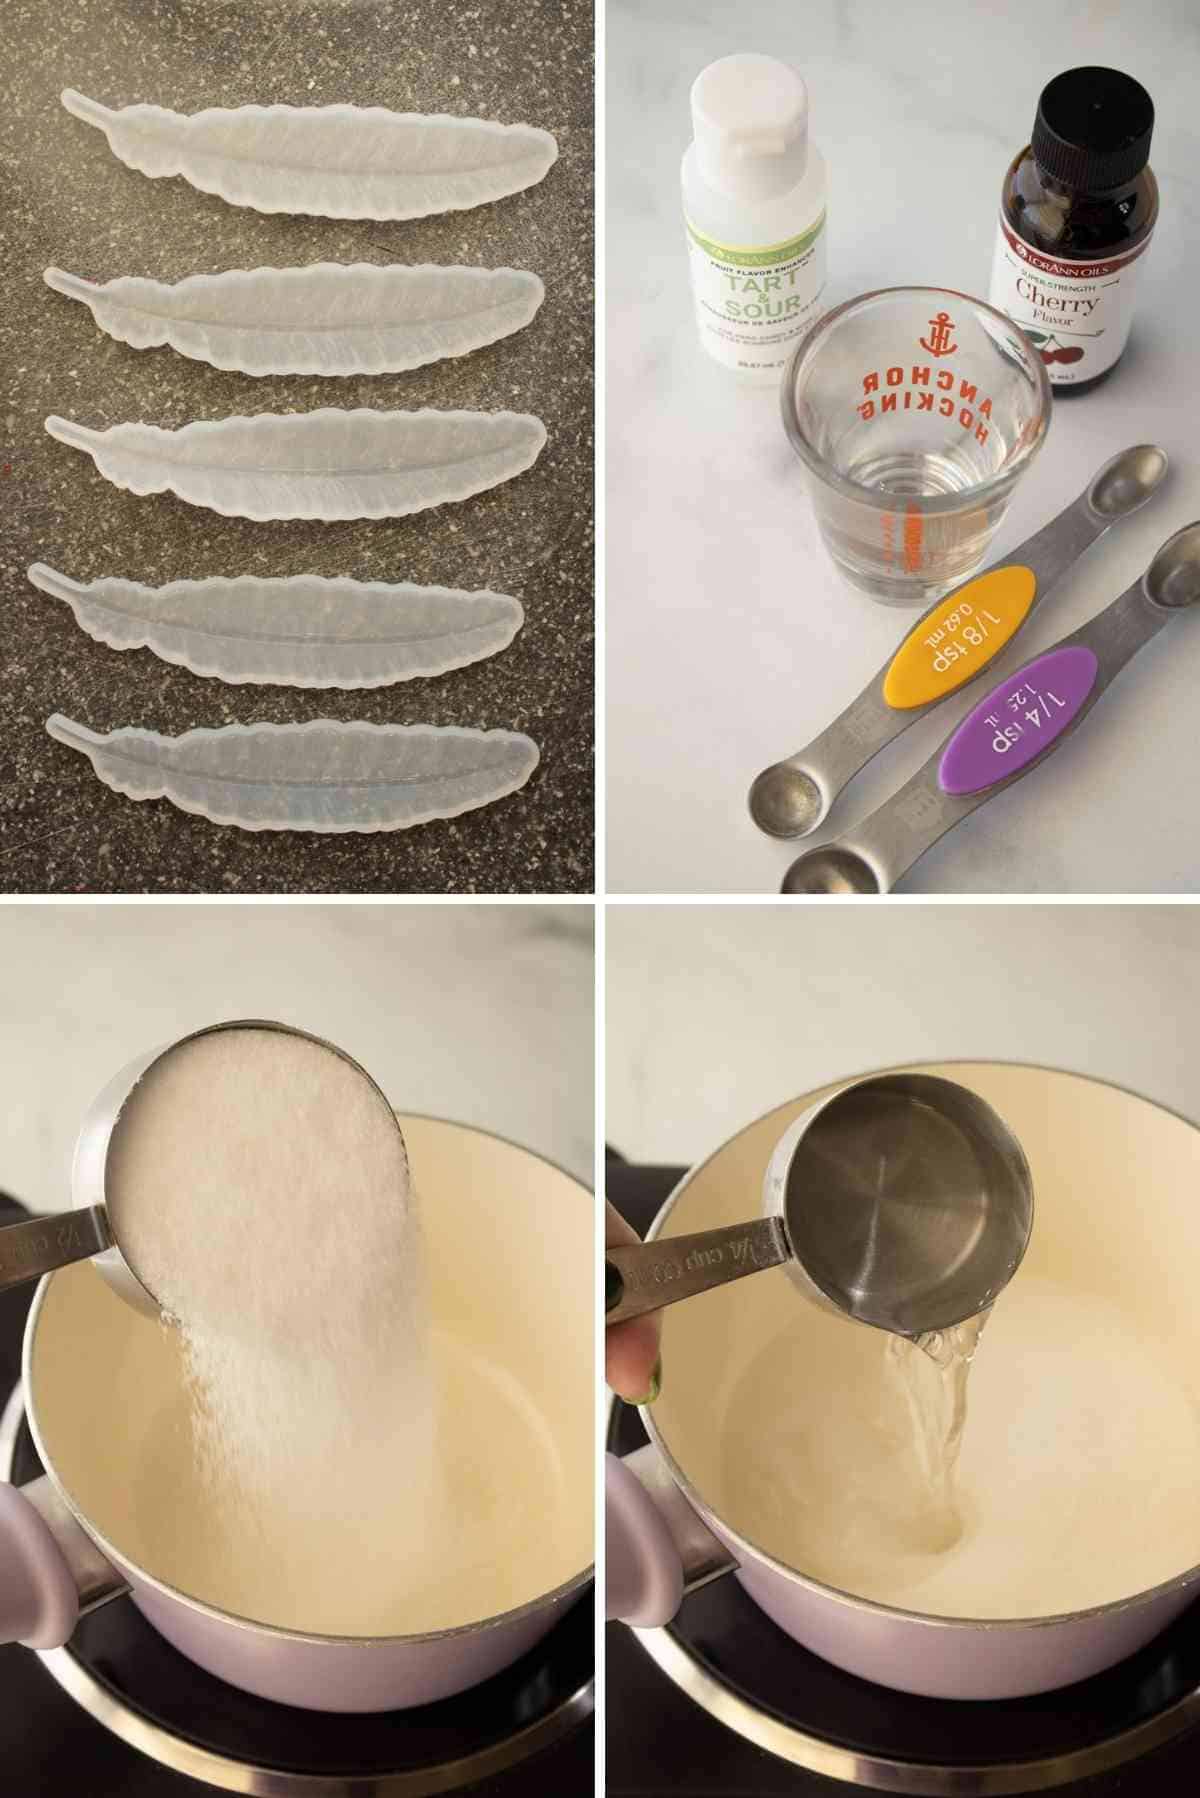 Lay out molds and measure the flavoring before starting the sugar syrup.